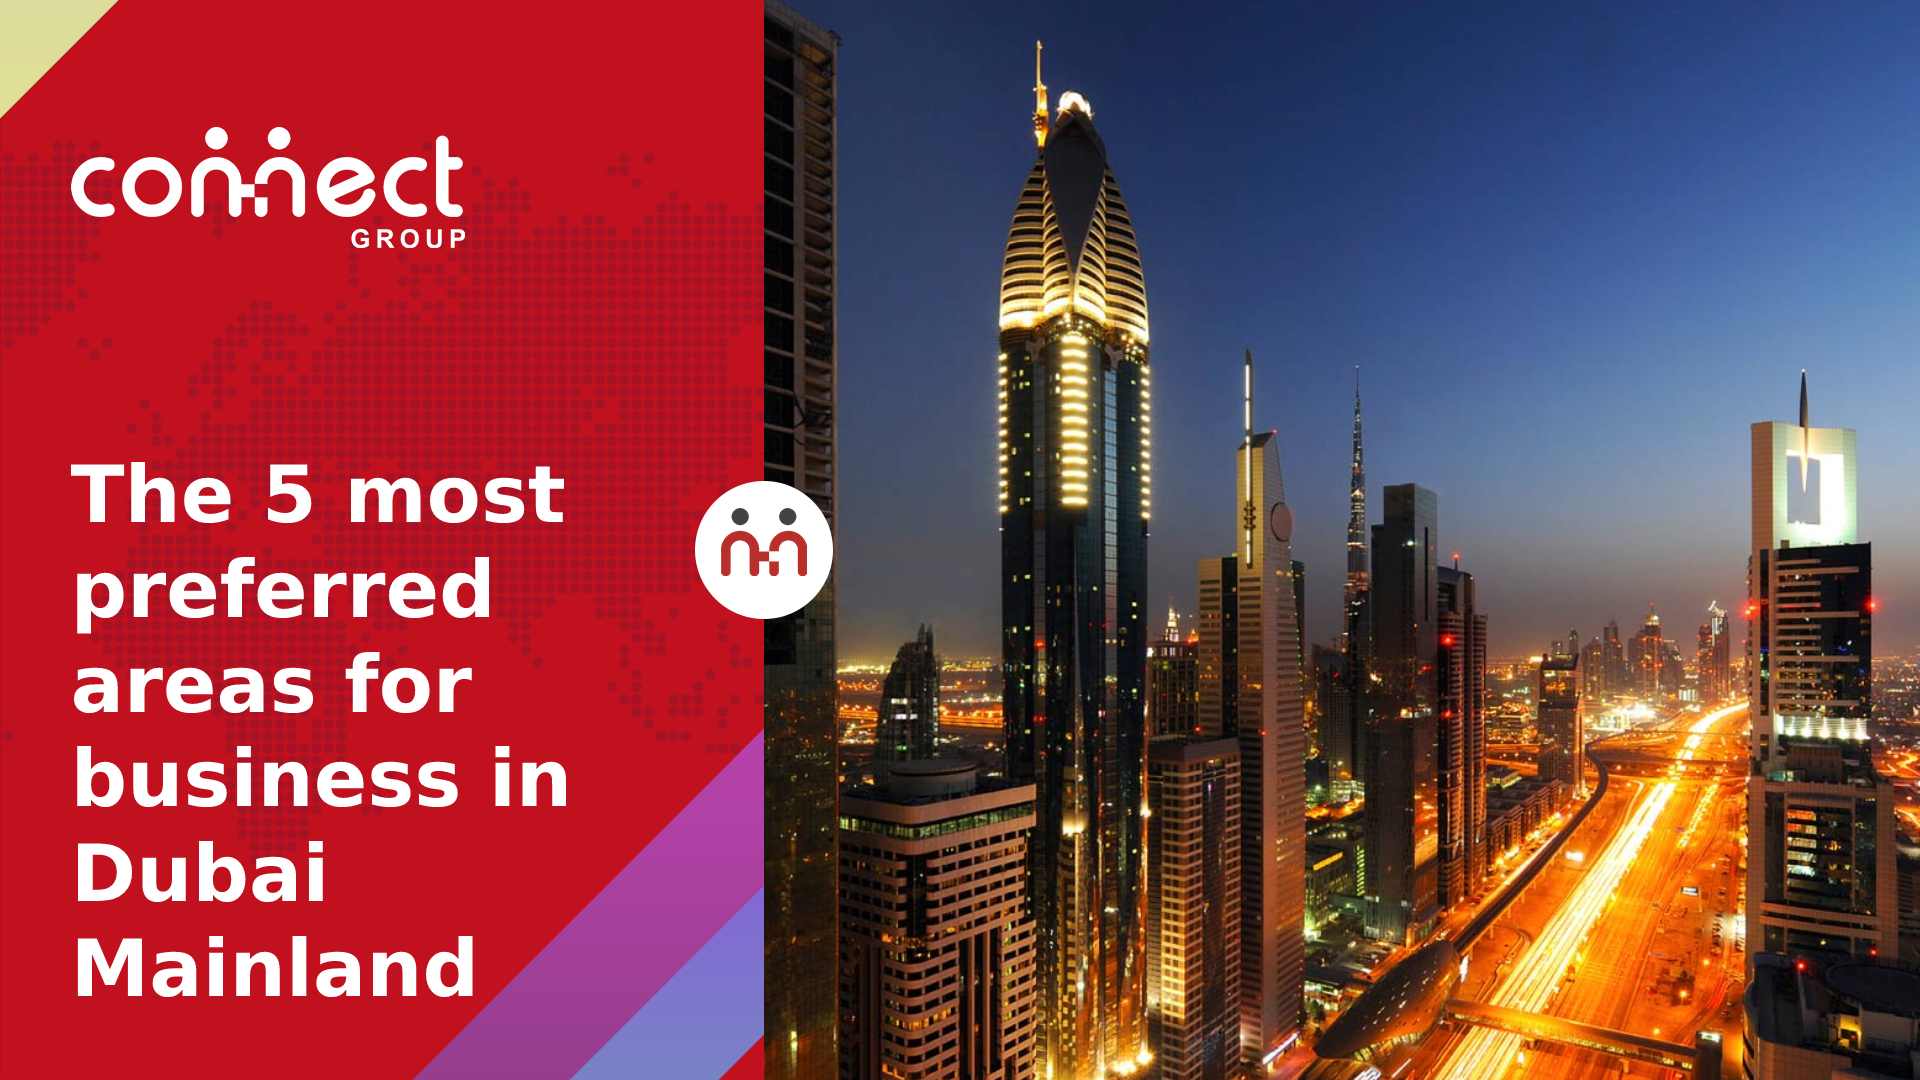 The 5 most preferred areas for business in Dubai Mainland